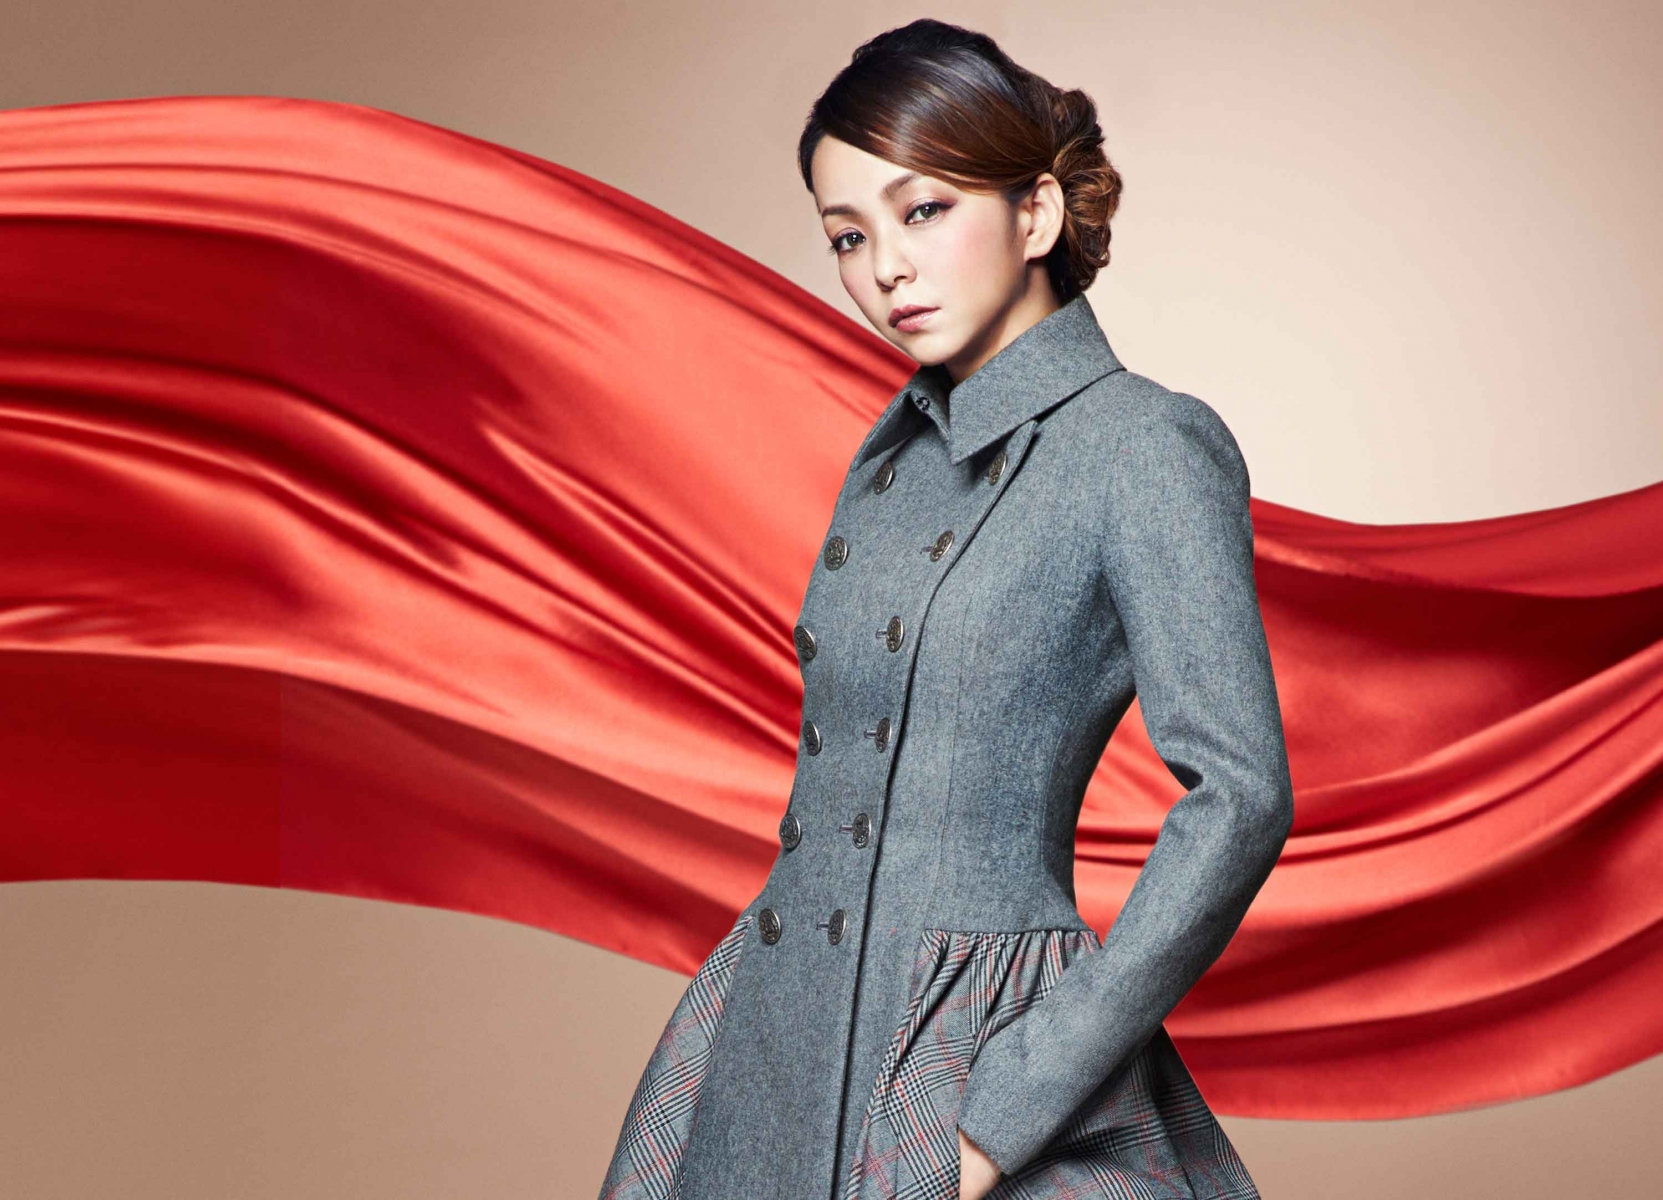 Namie Amuro Walks Down the “Red Carpet” of Life in the MV for Her New Single!